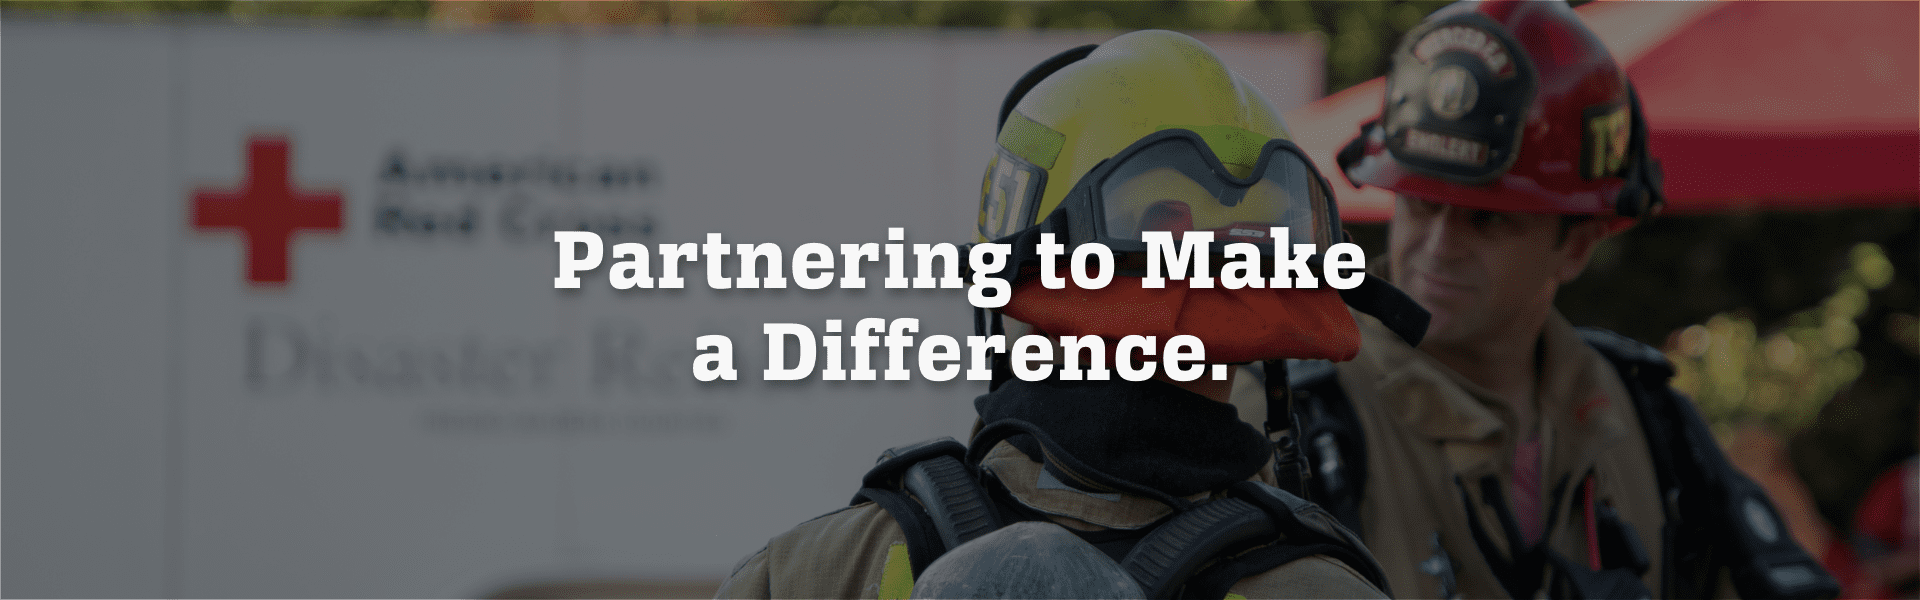 Partnering to Make a Difference.